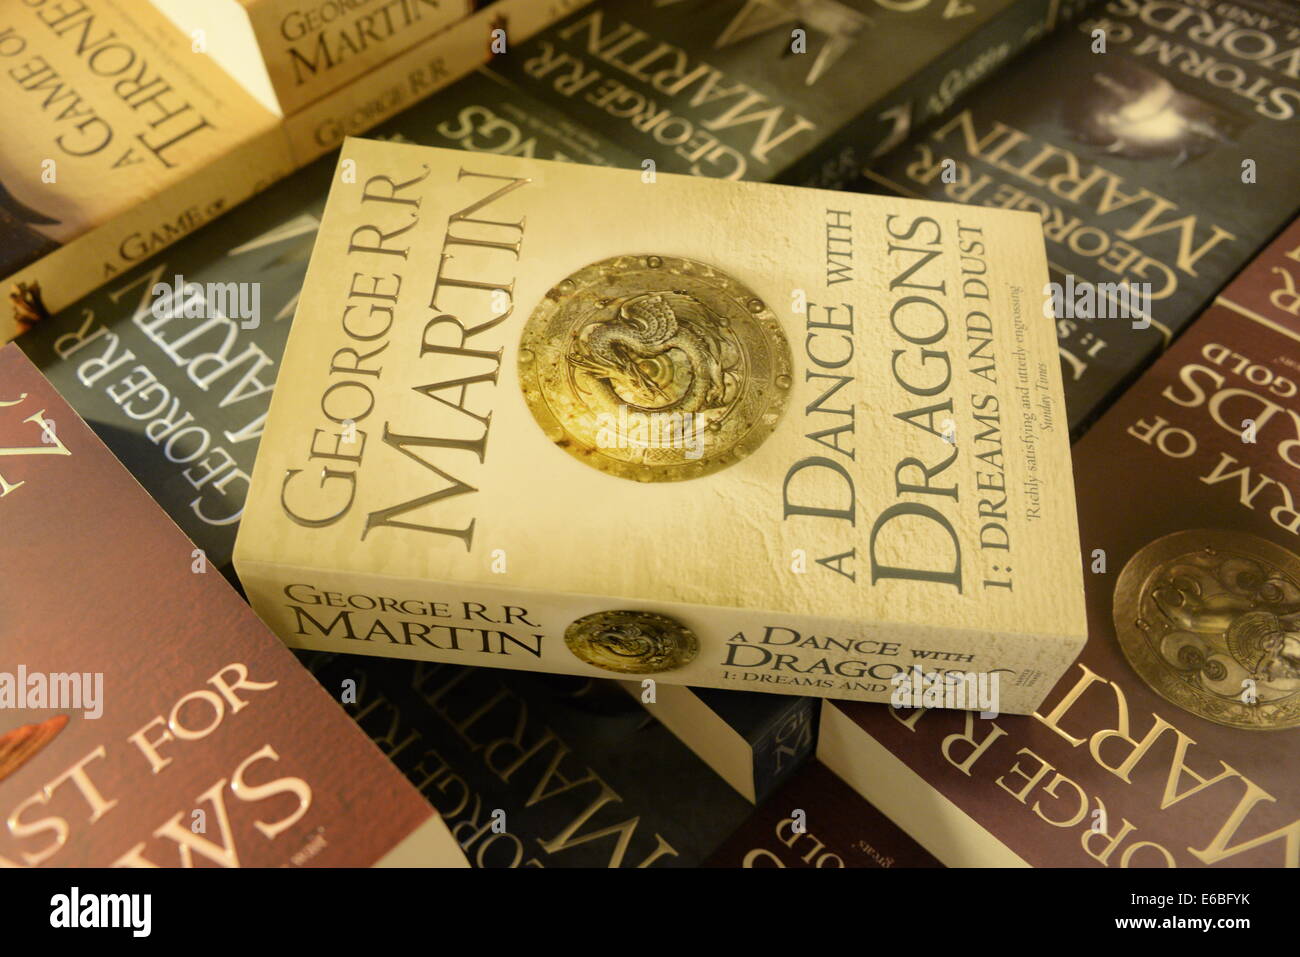 Game of thrones book cover hi-res stock photography and images - Alamy